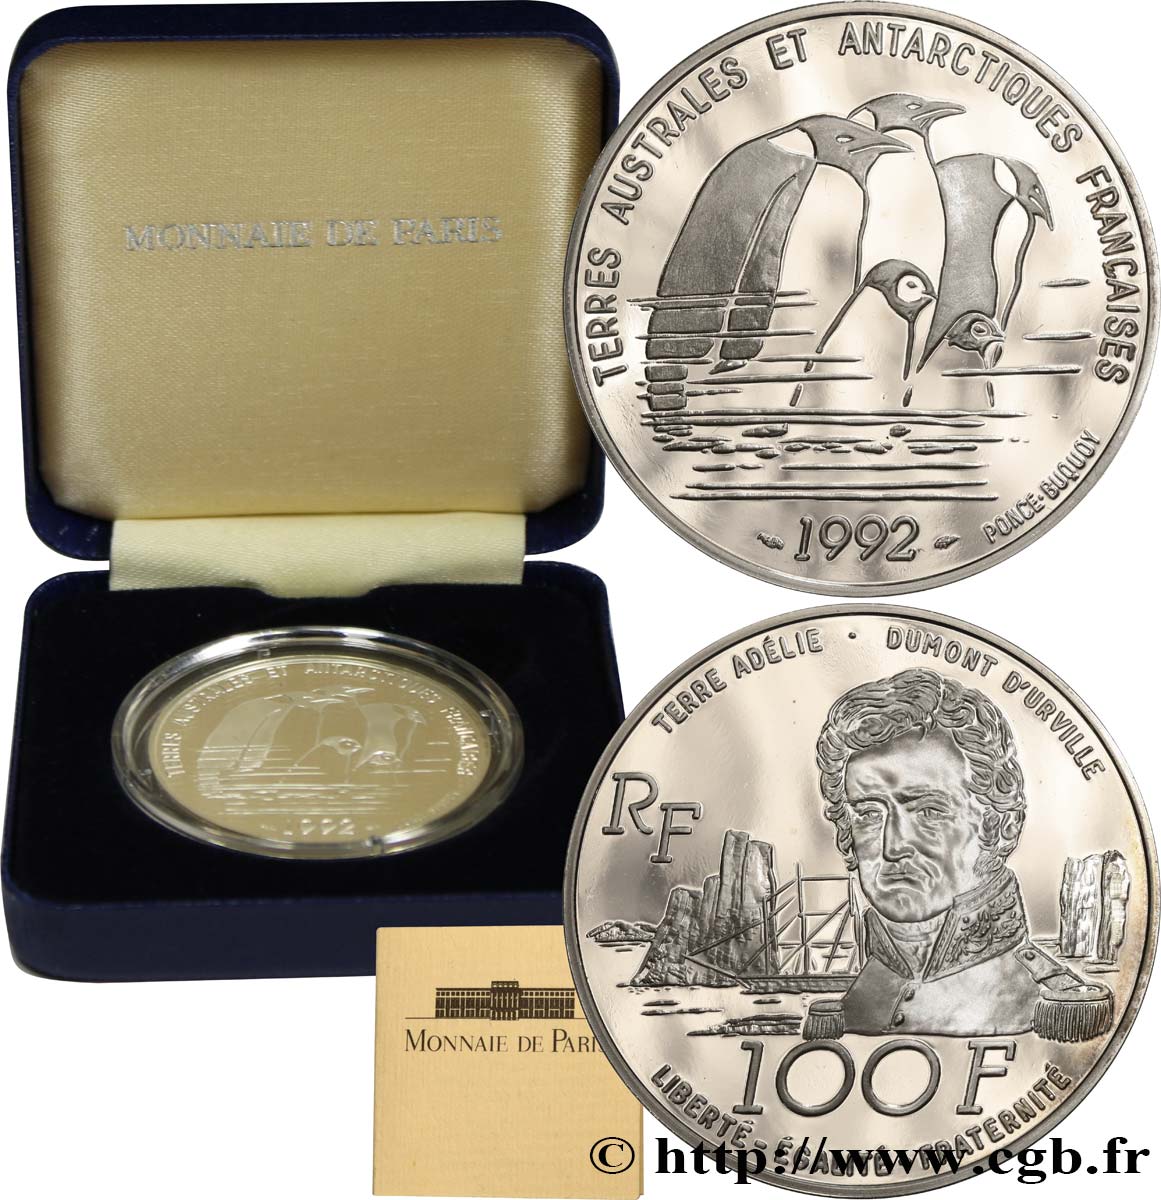 FRENCH SOUTHERN AND ANTARTIC LANDS 100 Francs Proof Dumont d’Urville - Manchots Empereur 1992  MS 